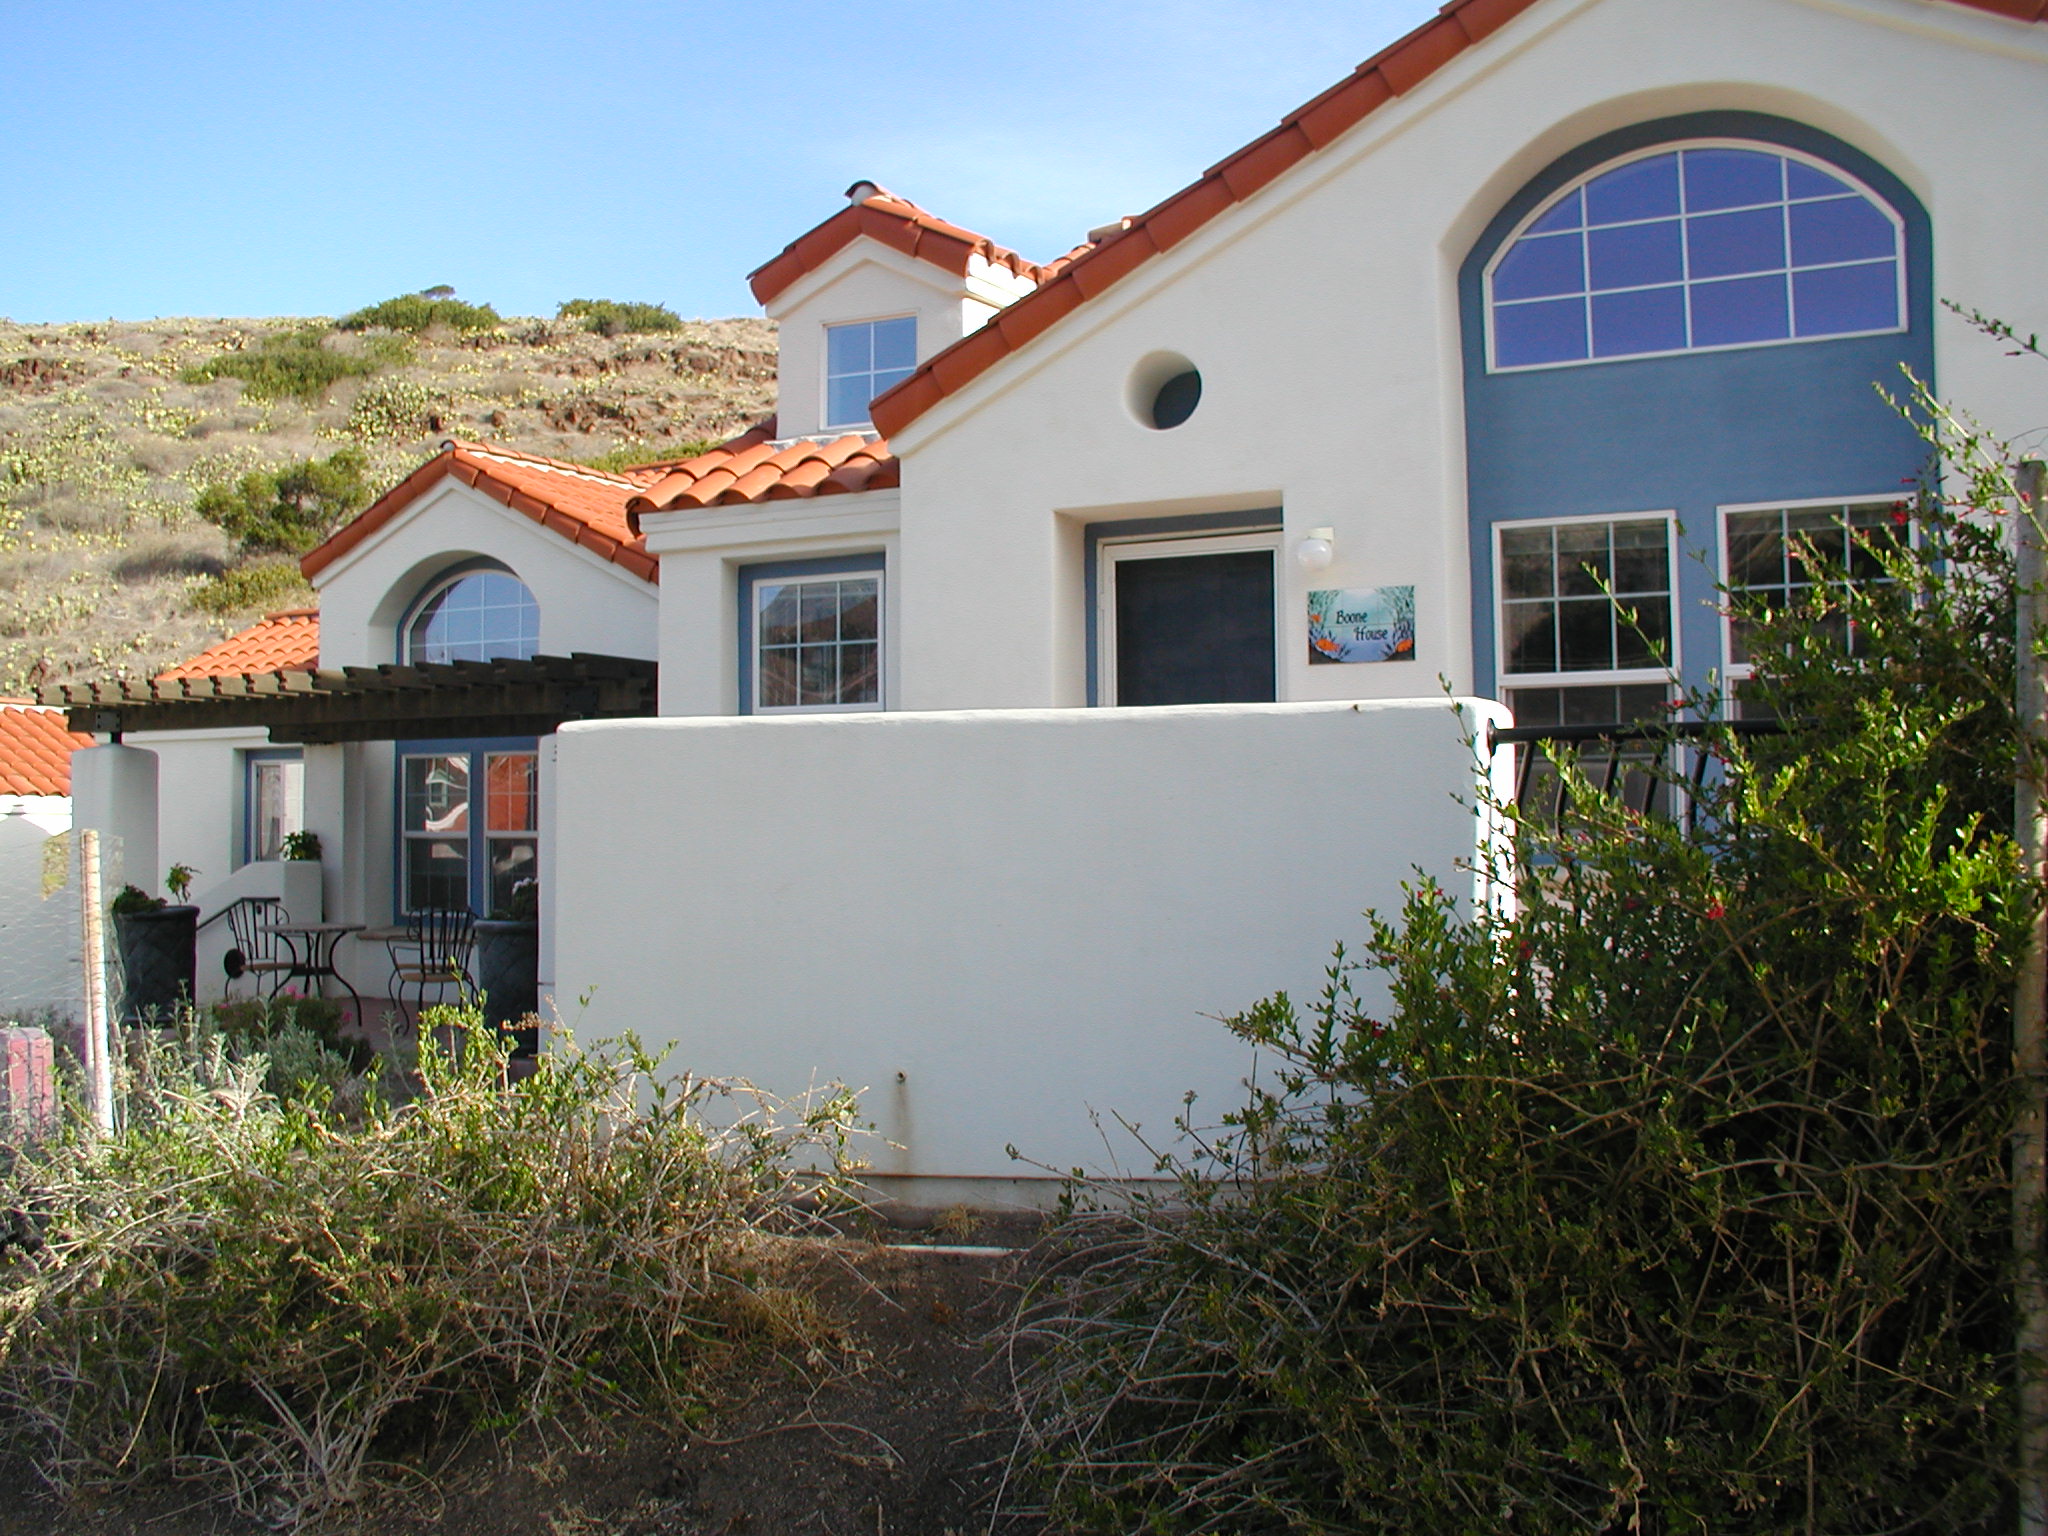 exterior of Wrigley Marine Science Center cottage housing, white buildings with red tile roofs